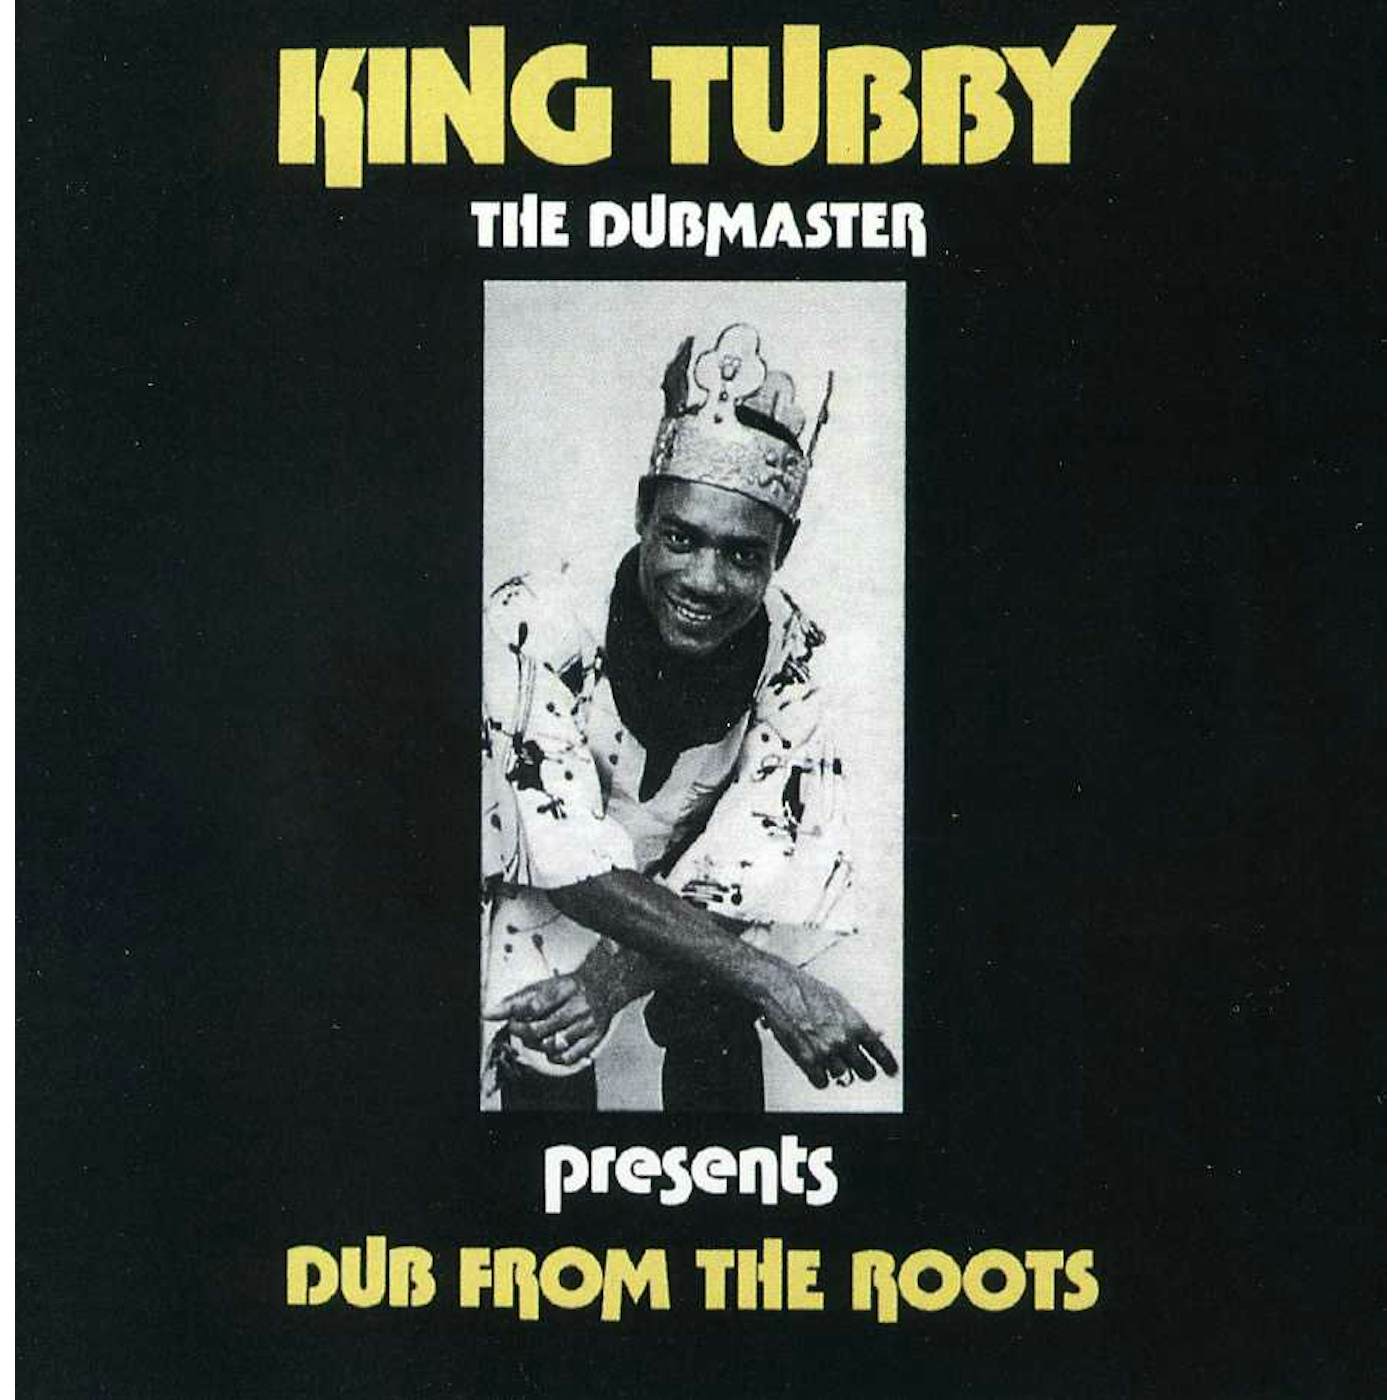 King Tubby DUB FROM THE ROOTS CD